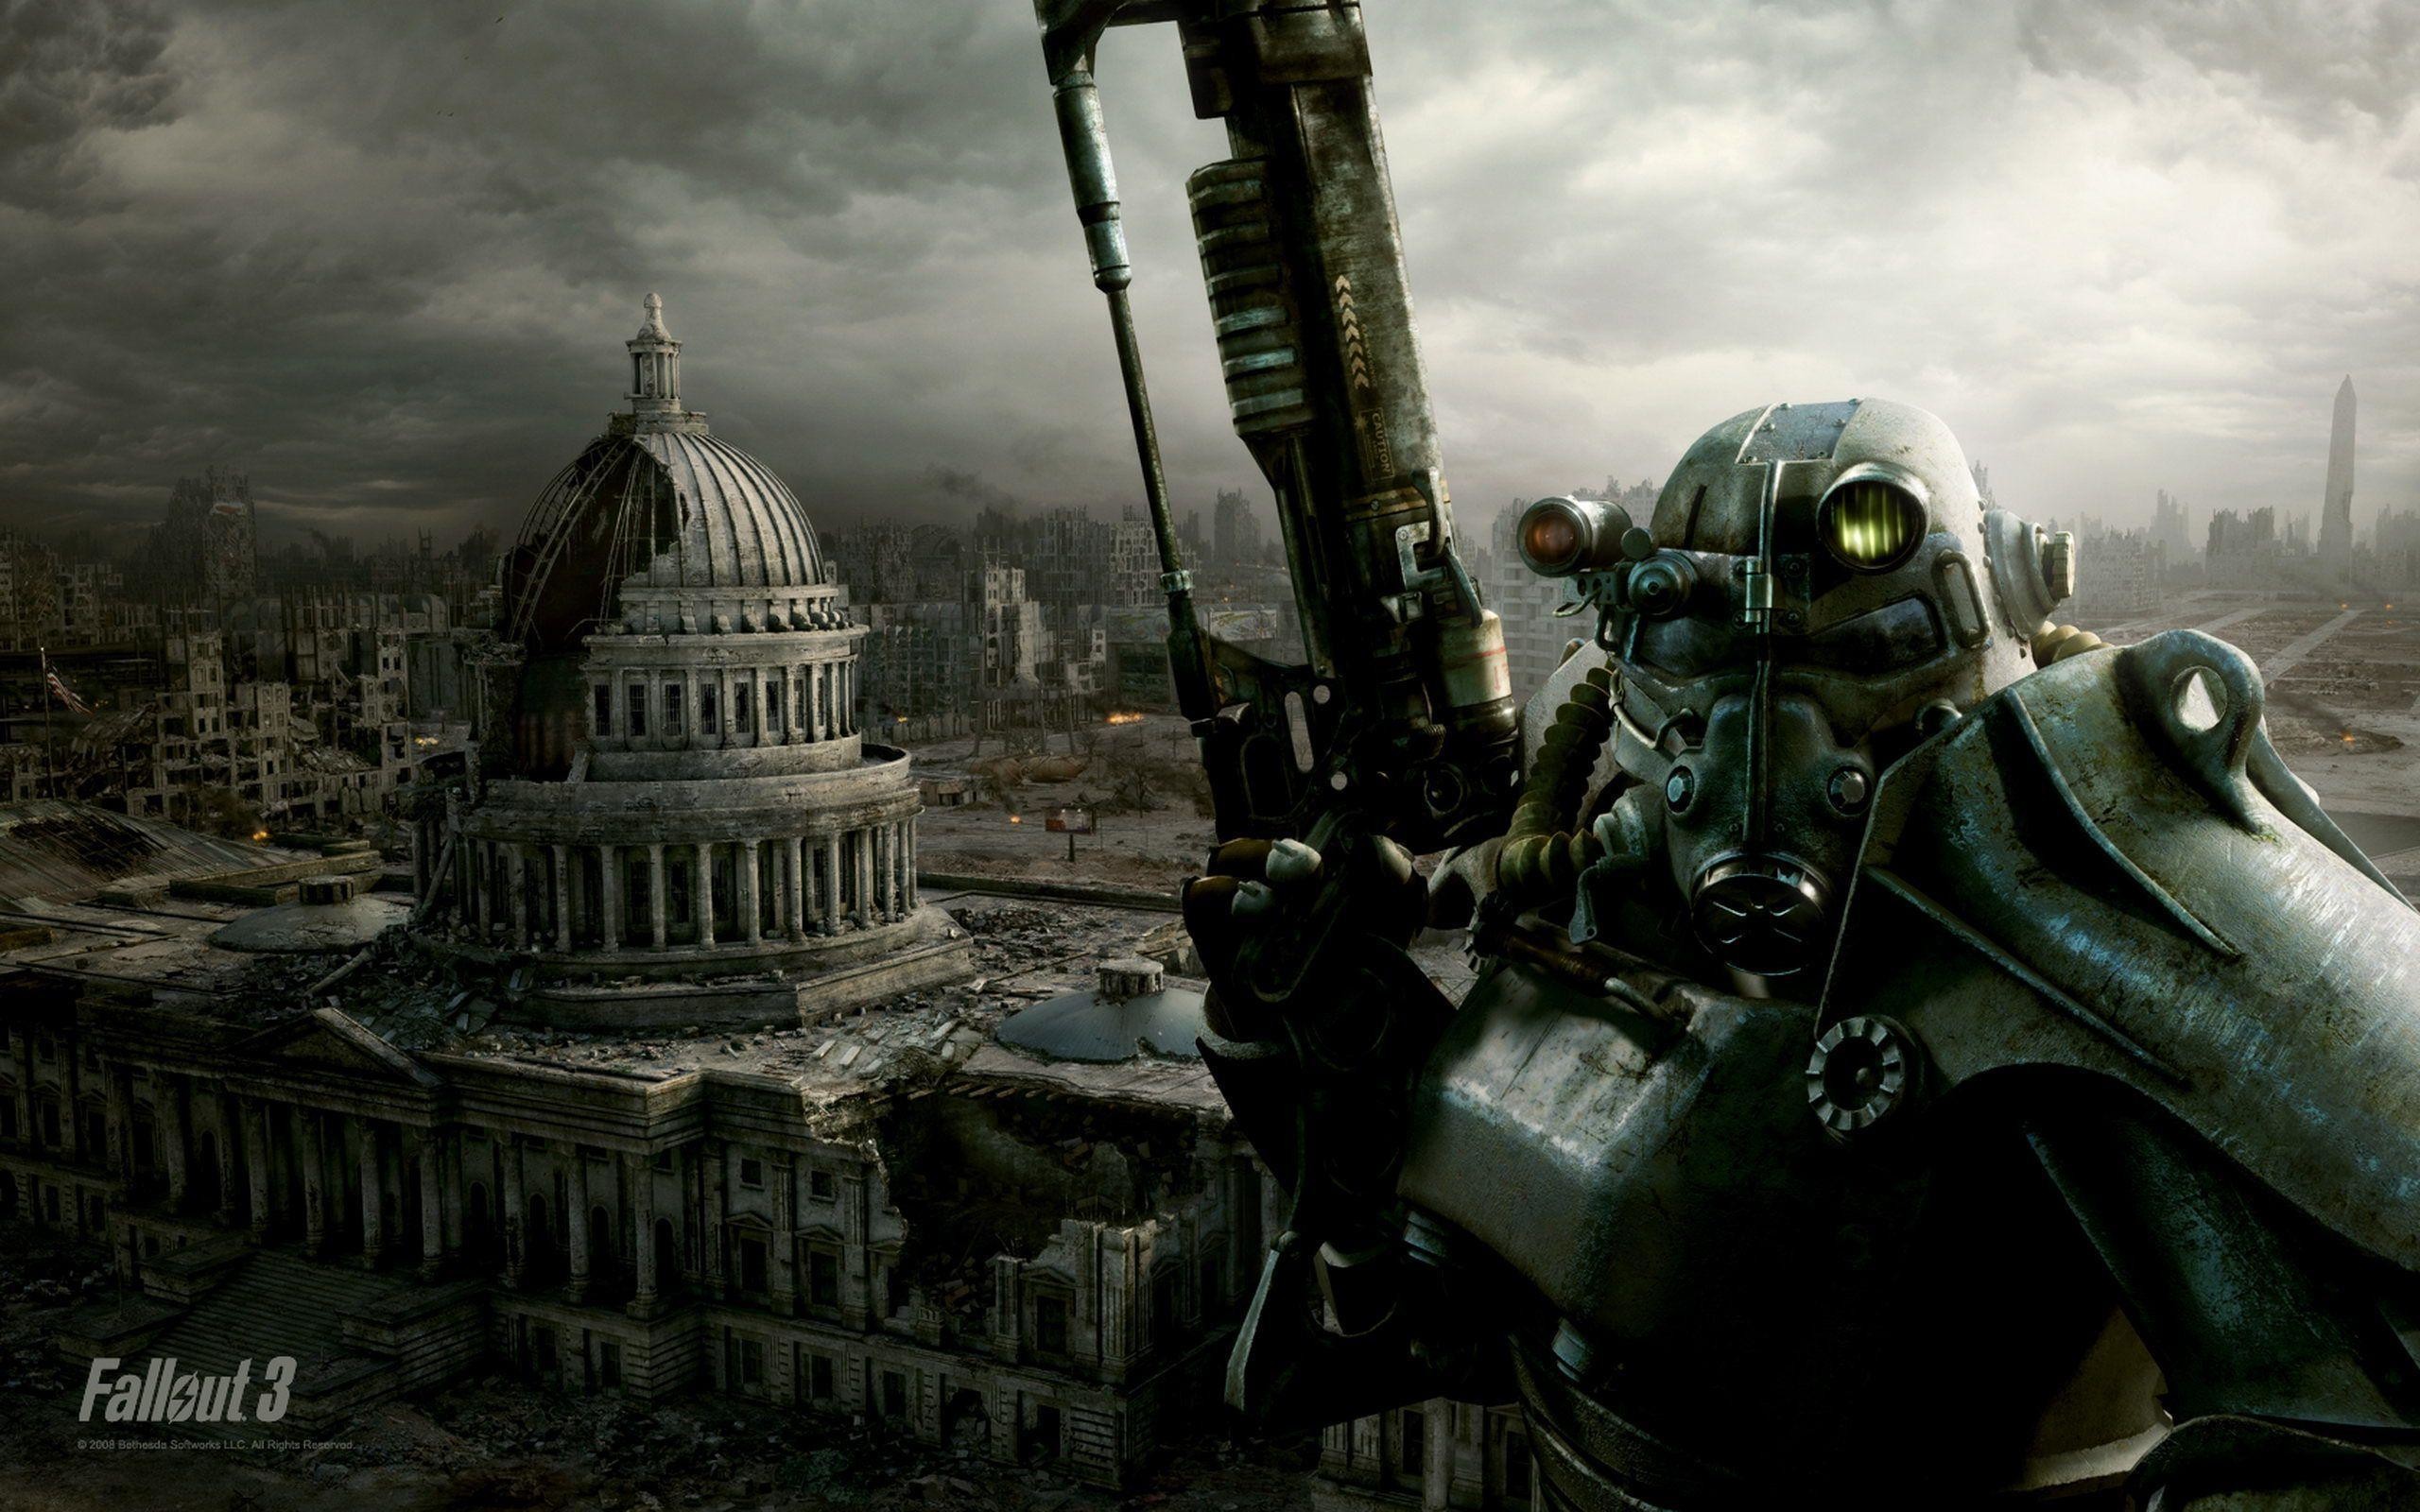 2560x1600 Fallout3 Wallpapers - Full HD wallpaper search